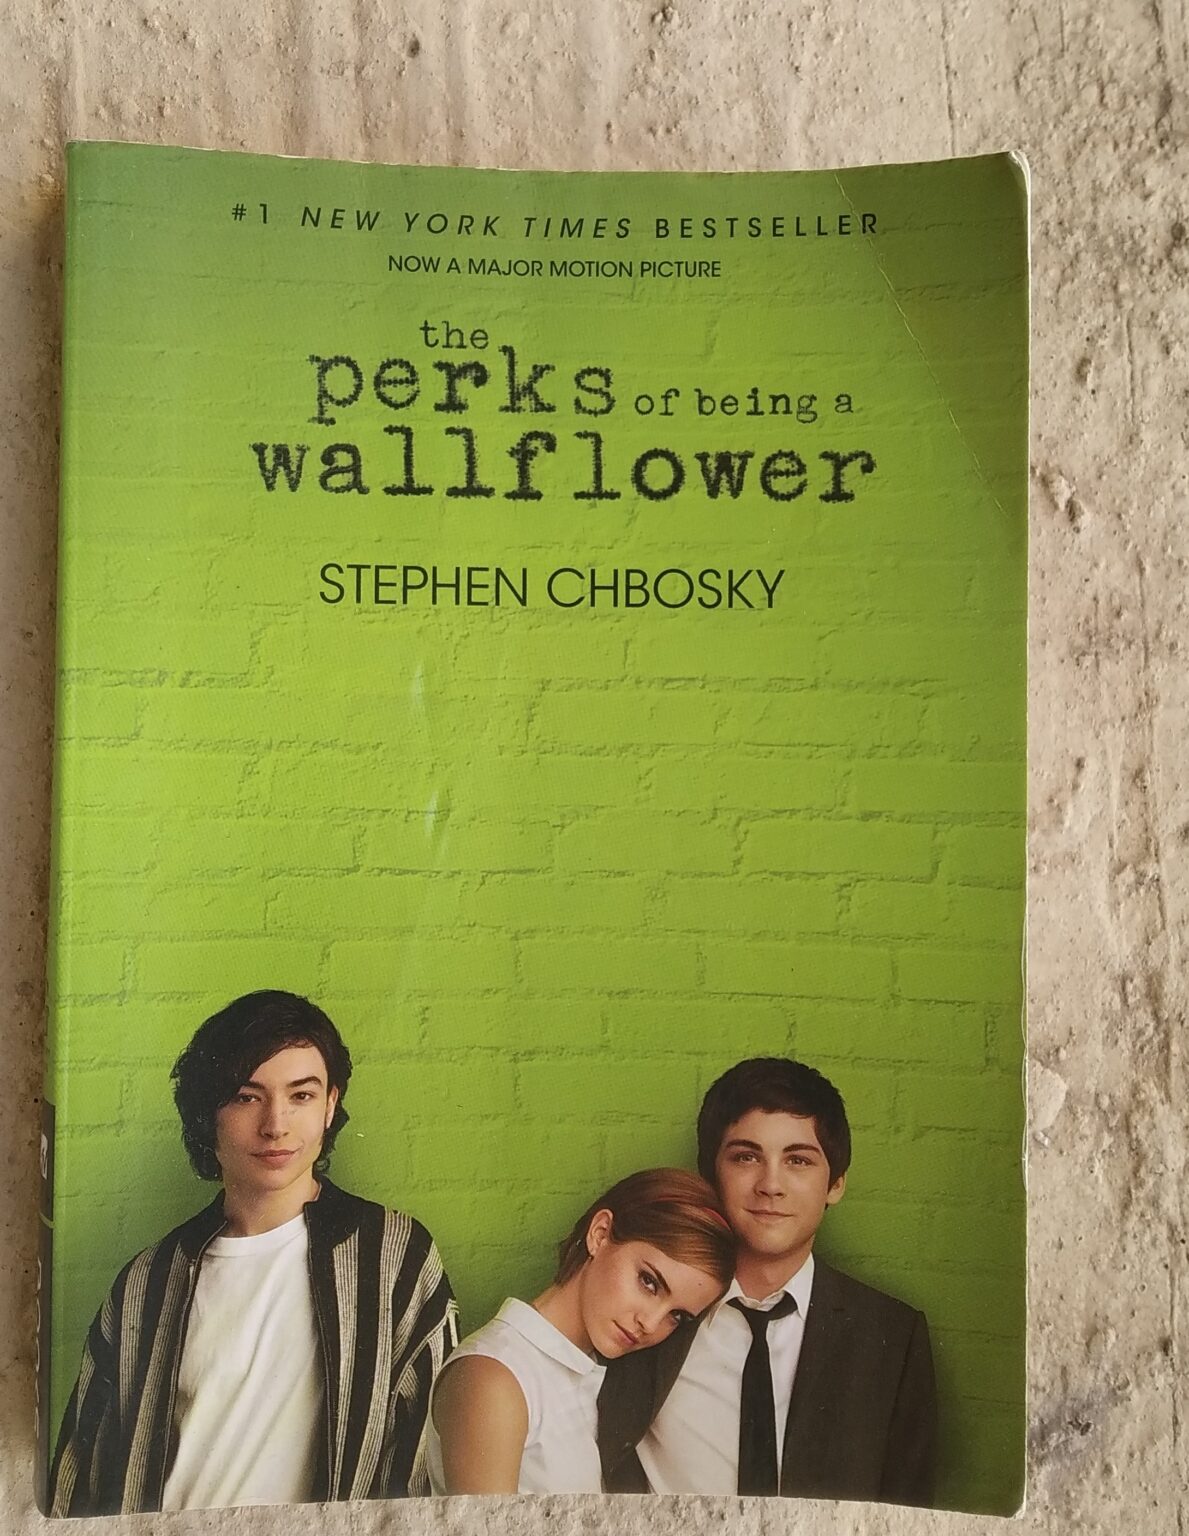 the perks of being a wallflower book price